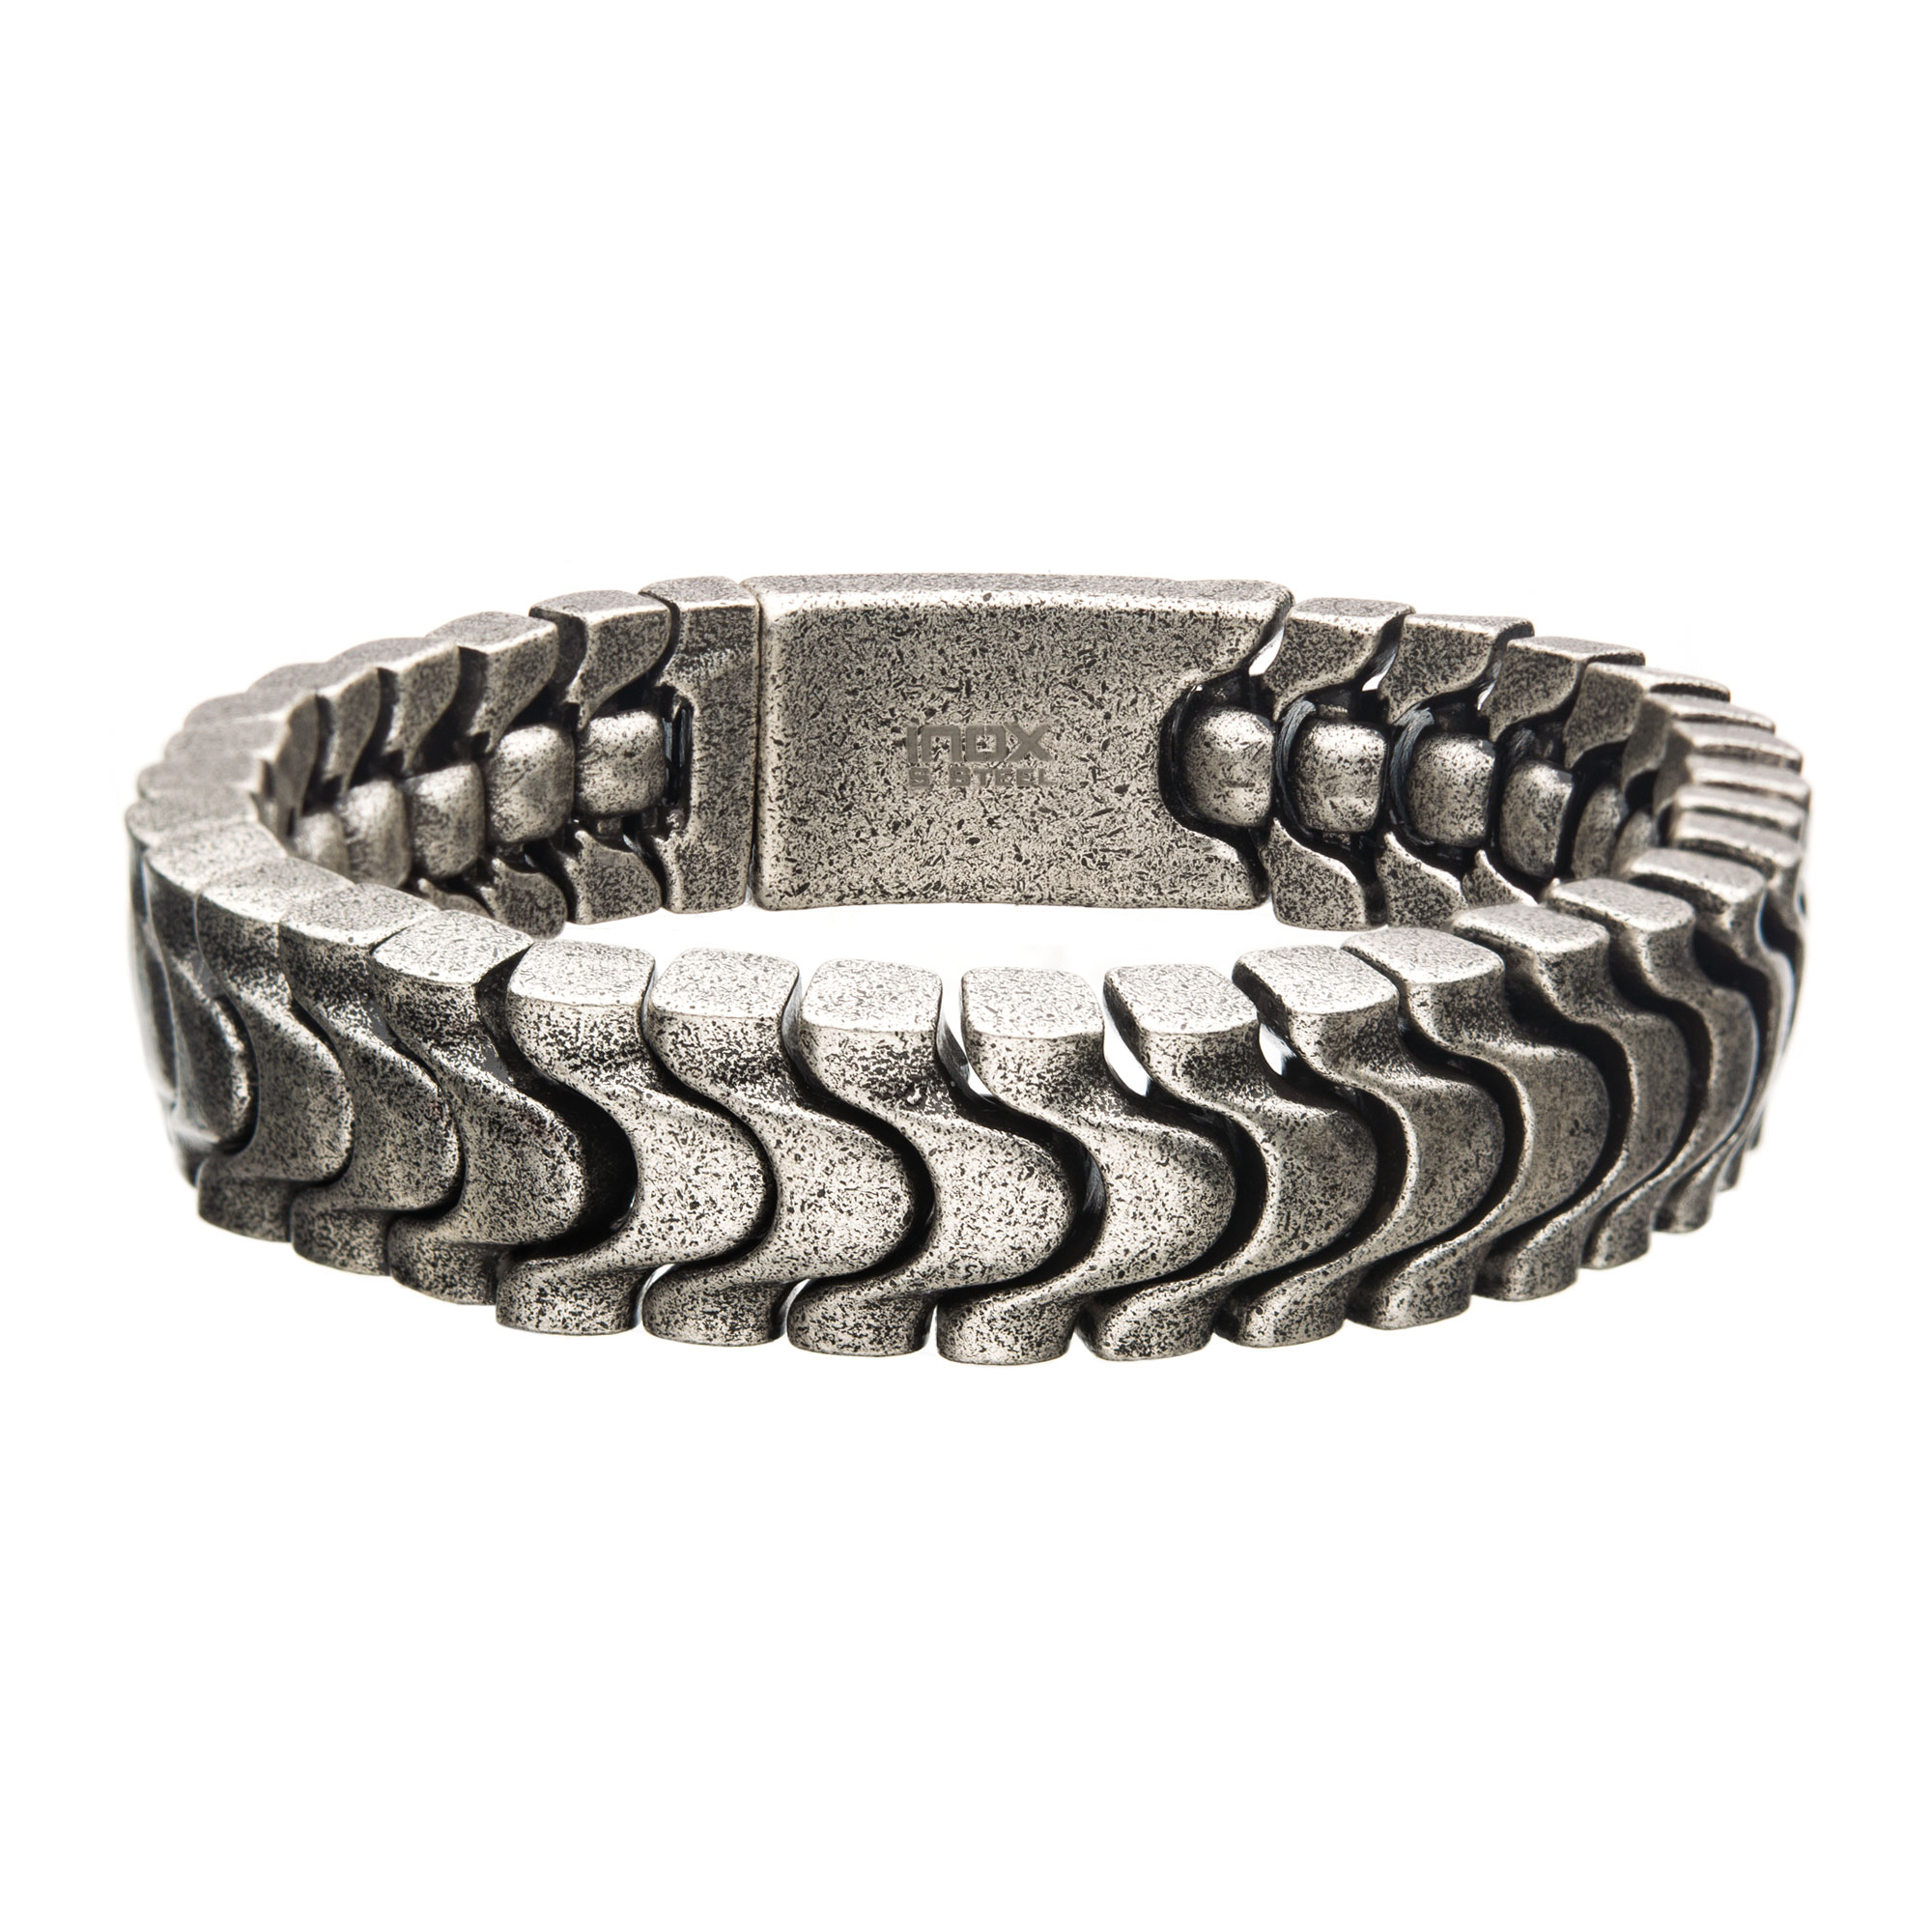 Antiqued Stainless Steel Armor Link Bracelet Jayson Jewelers Cape Girardeau, MO